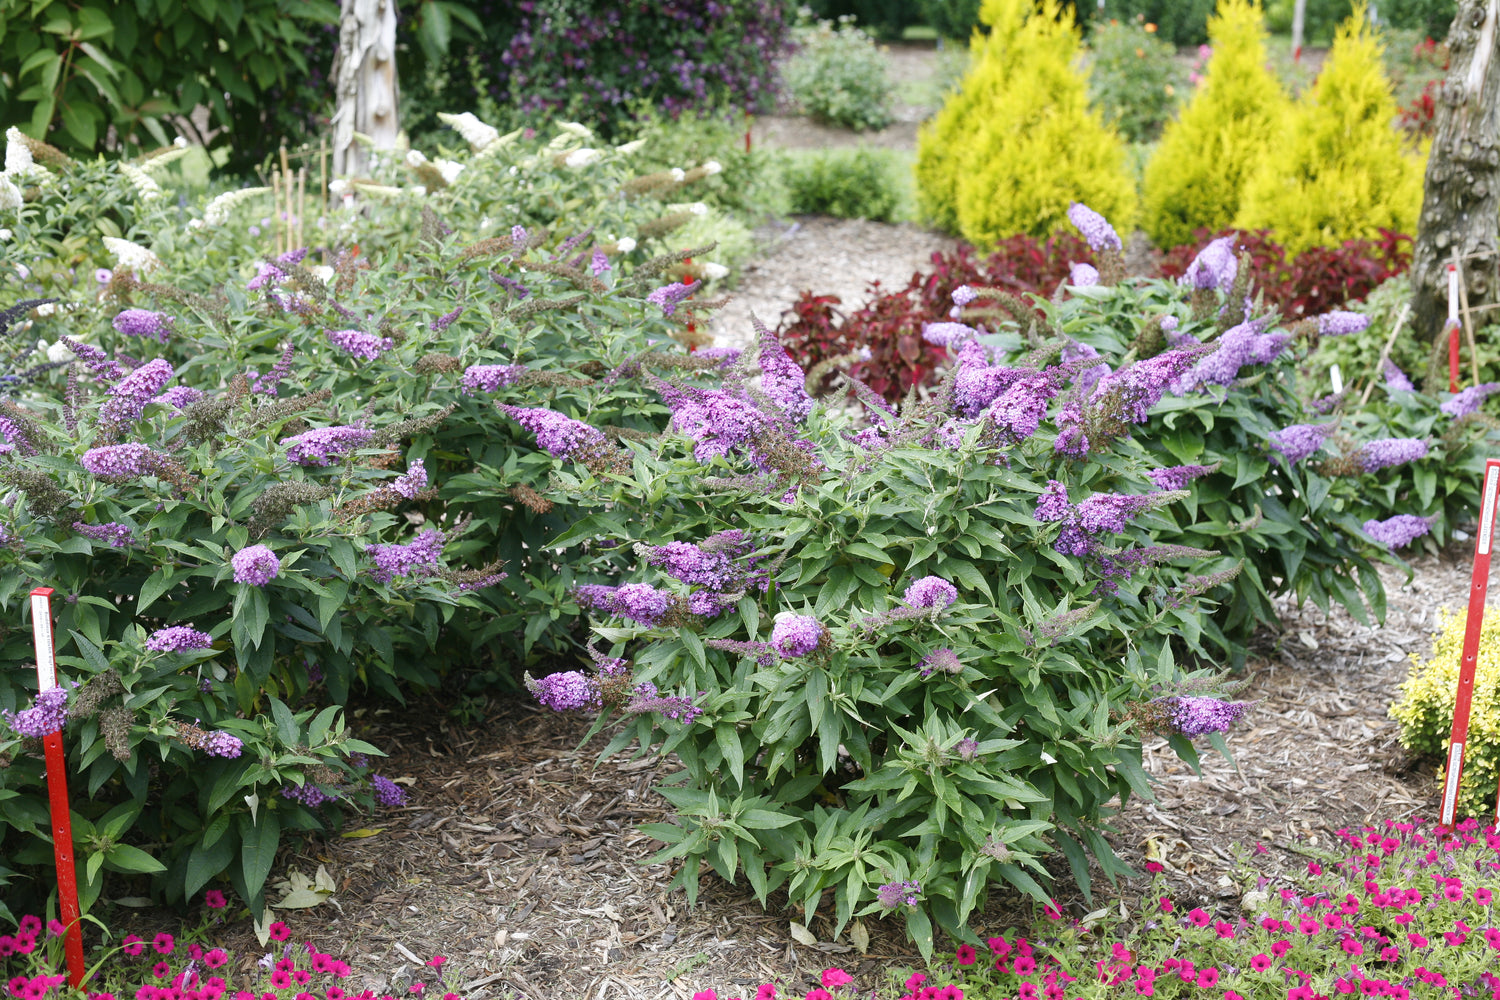 Buddleia Pugster Periwinkle planted in a colorful garden